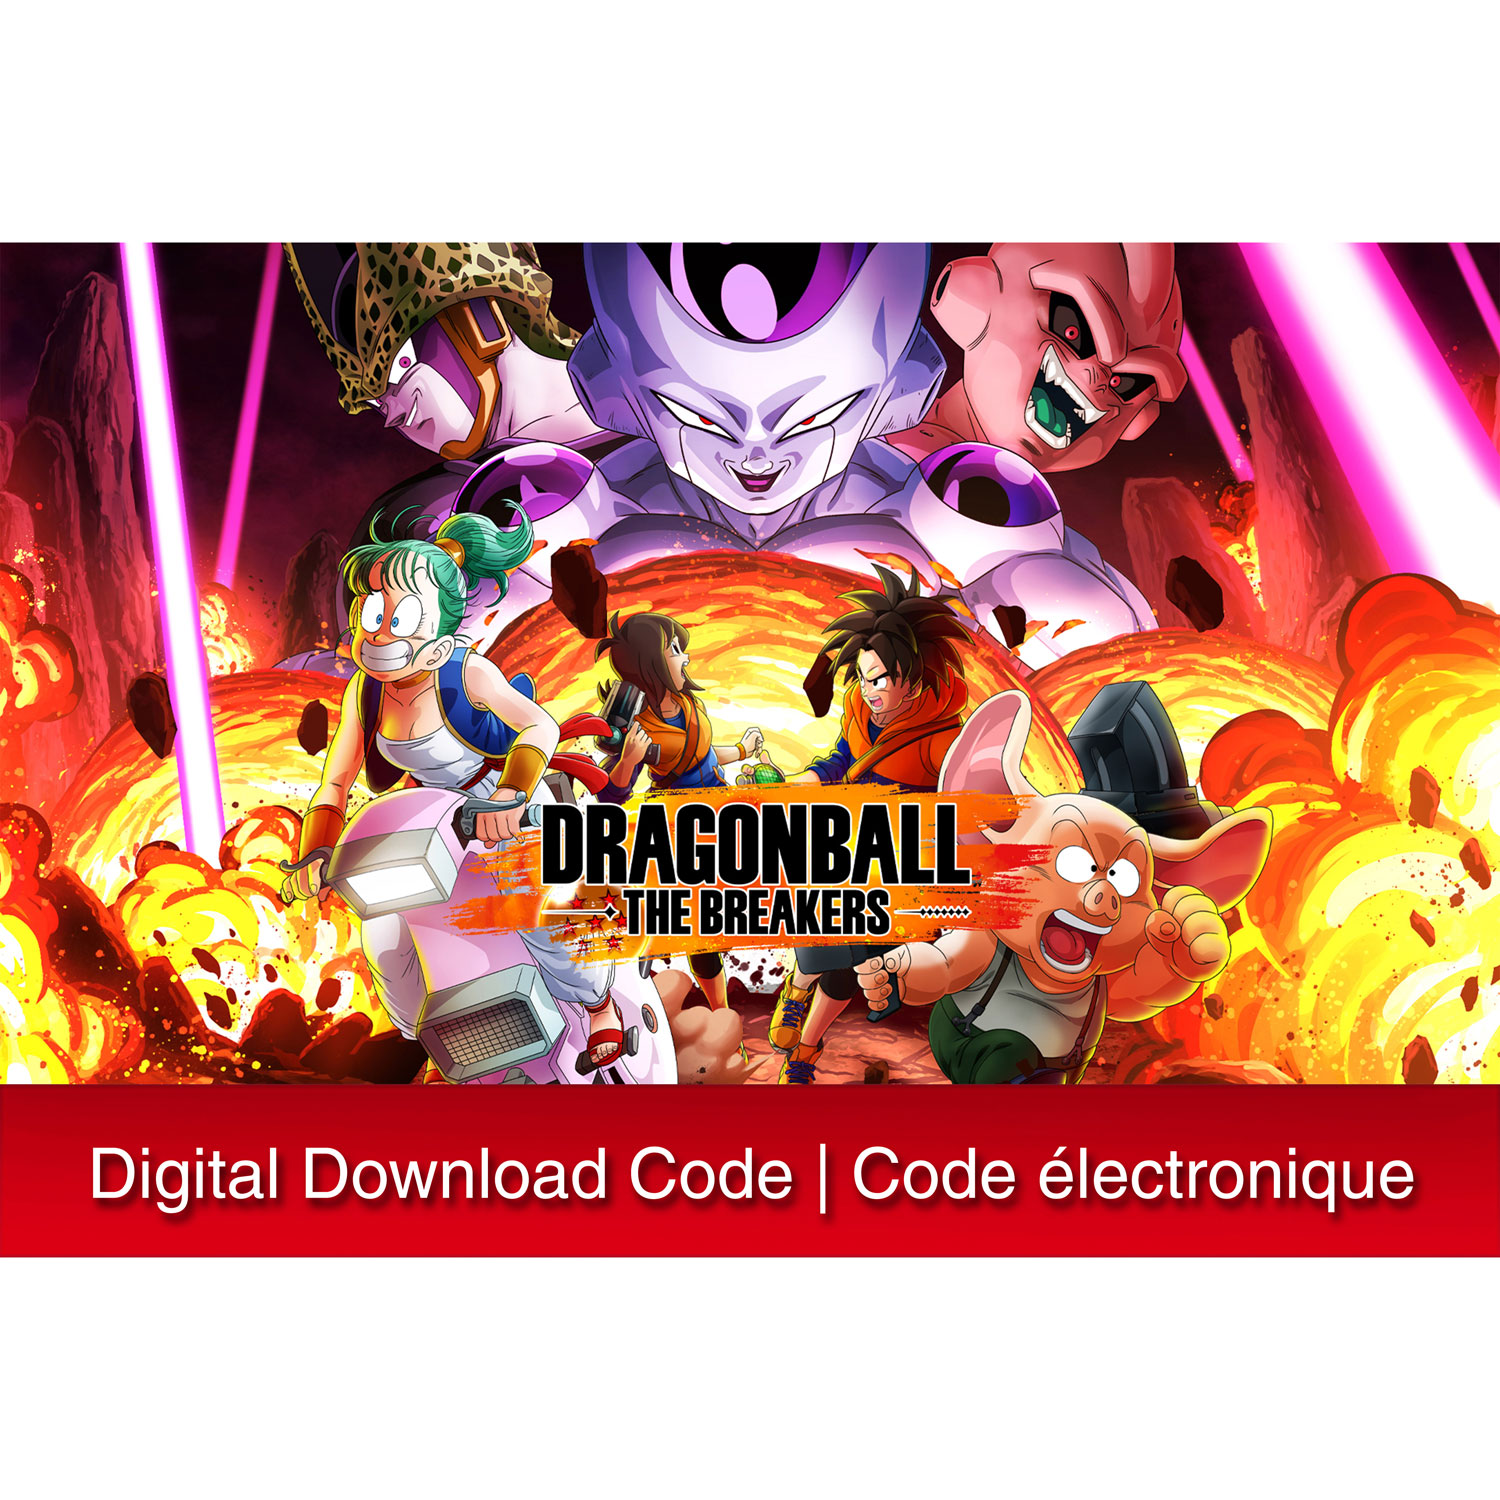 Dragon Ball: The Breakers (Switch) - Digital Download